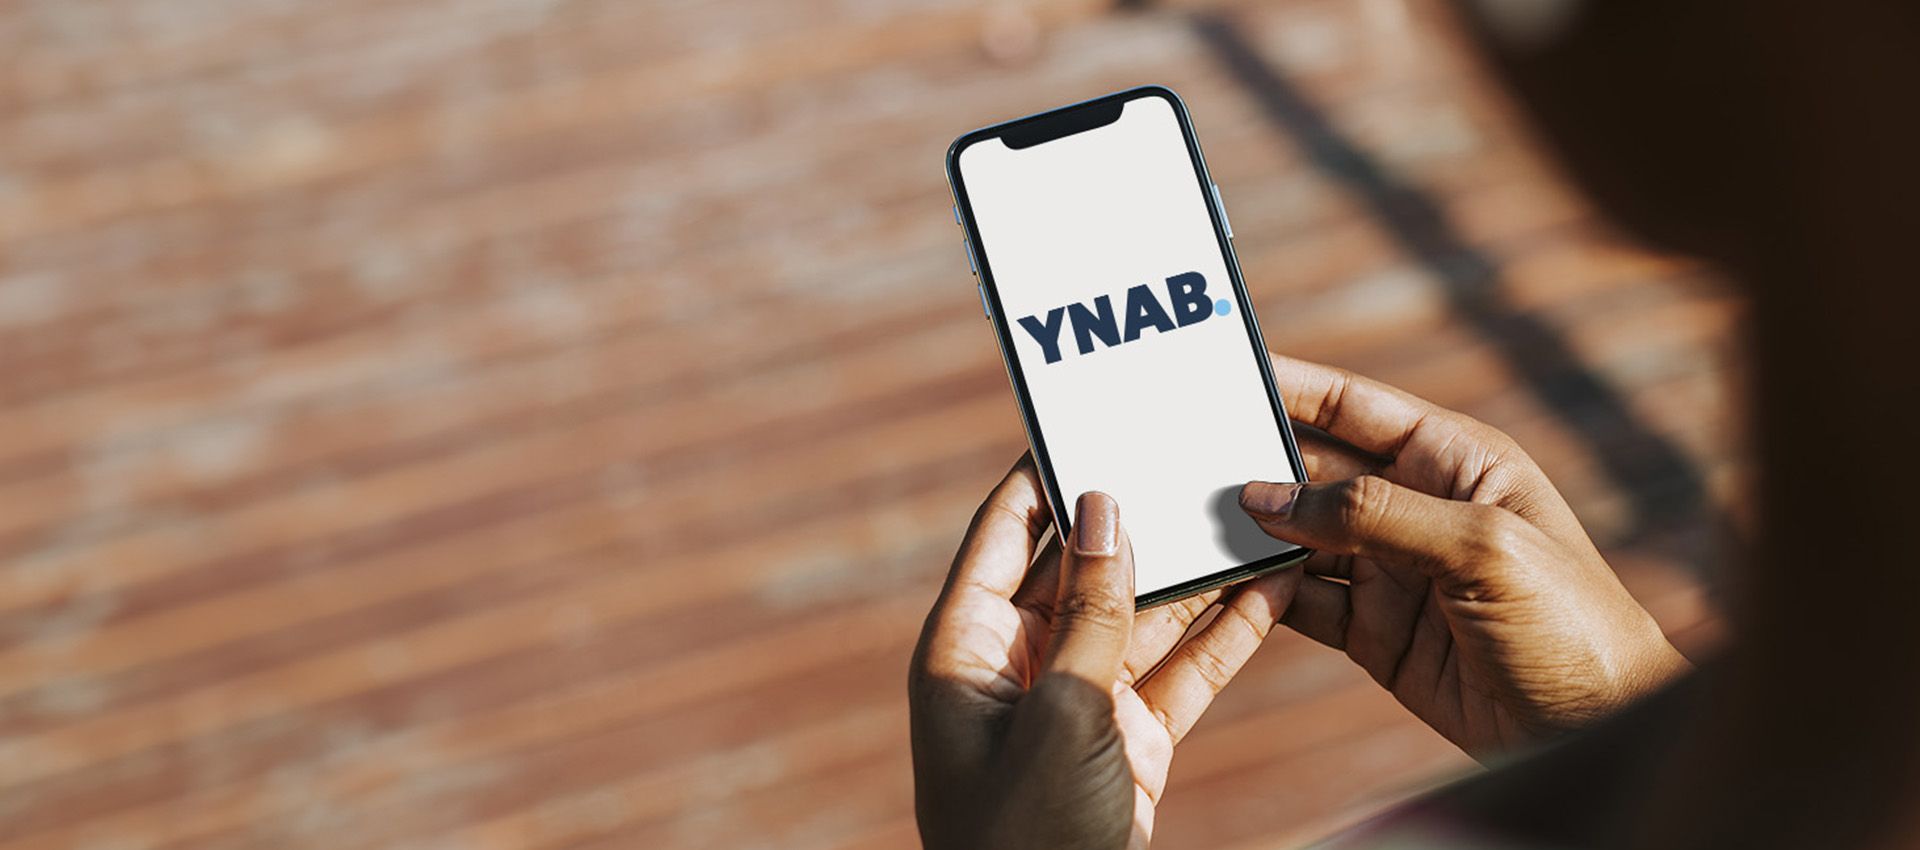 YNAB logo on mobile device being held in the hands of black woman with interlock brick ground in the background